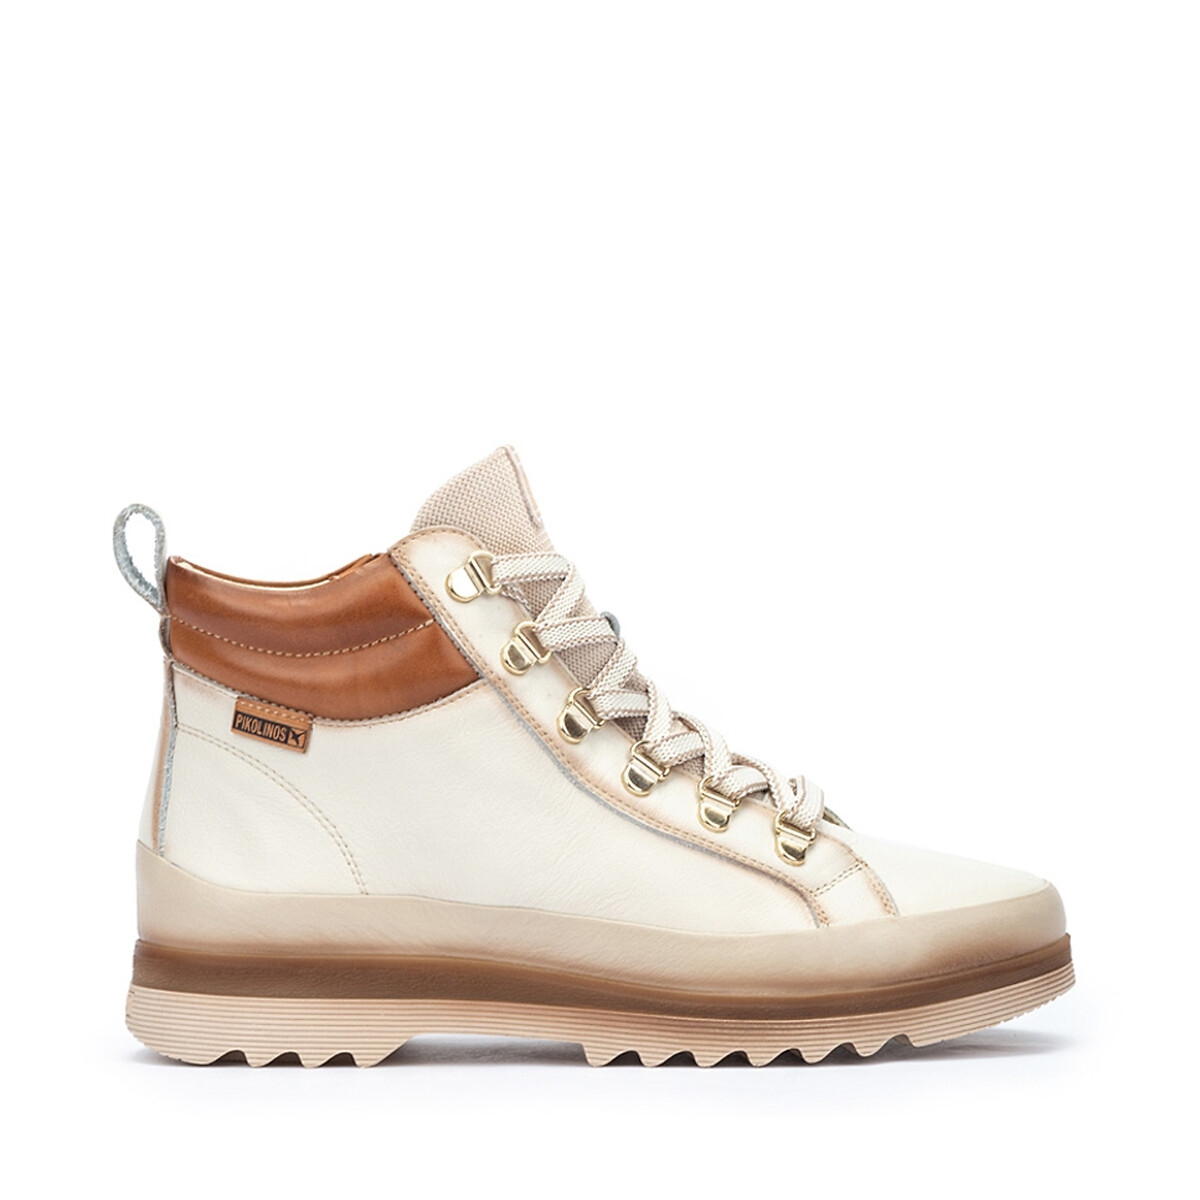 Pikolinos Vigo High Top Trainers in Leather | Rather Saucy